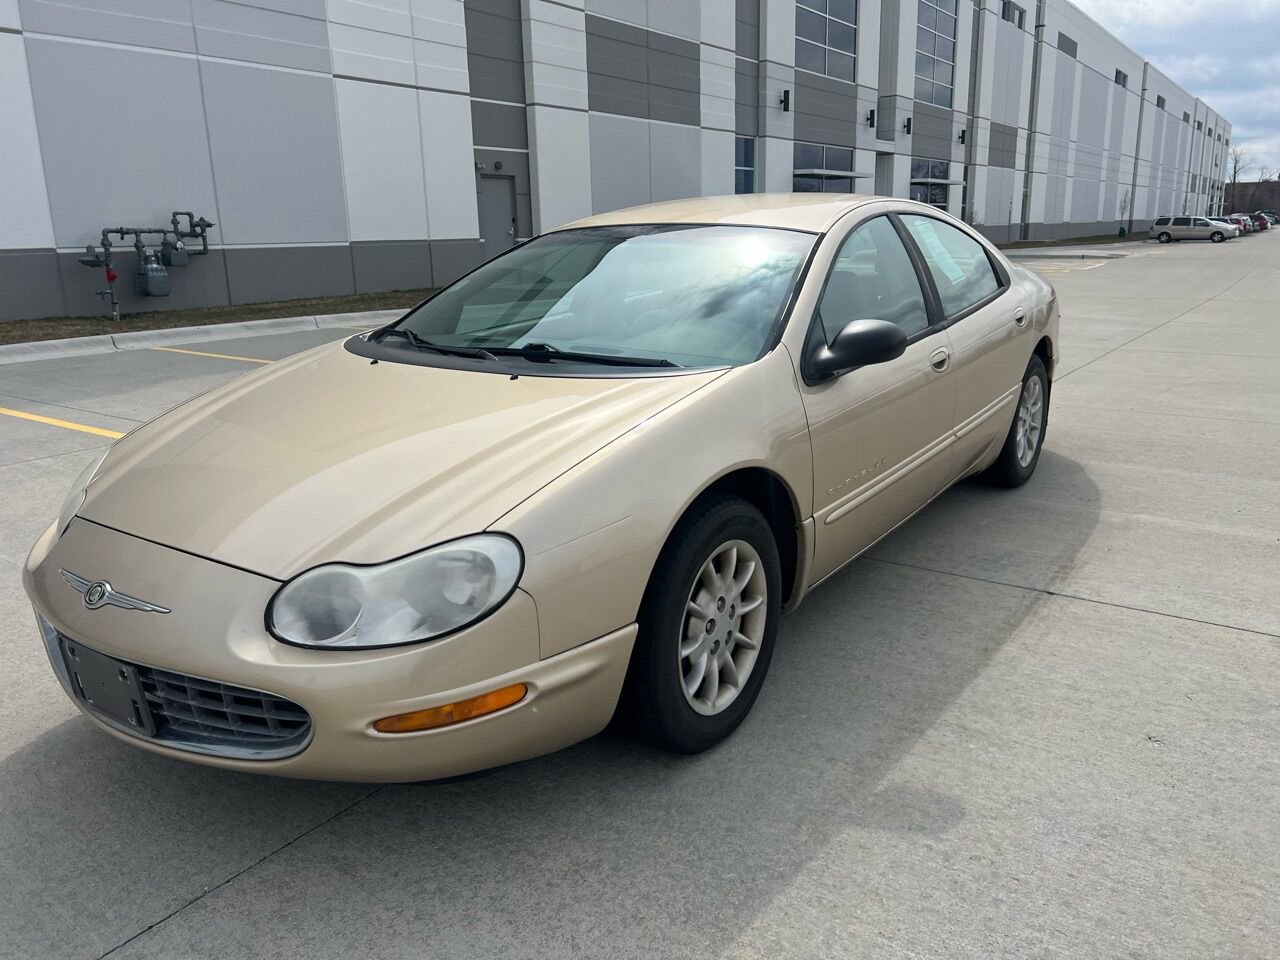 Used 1999 Chrysler Concorde for Sale Right Now - Autotrader